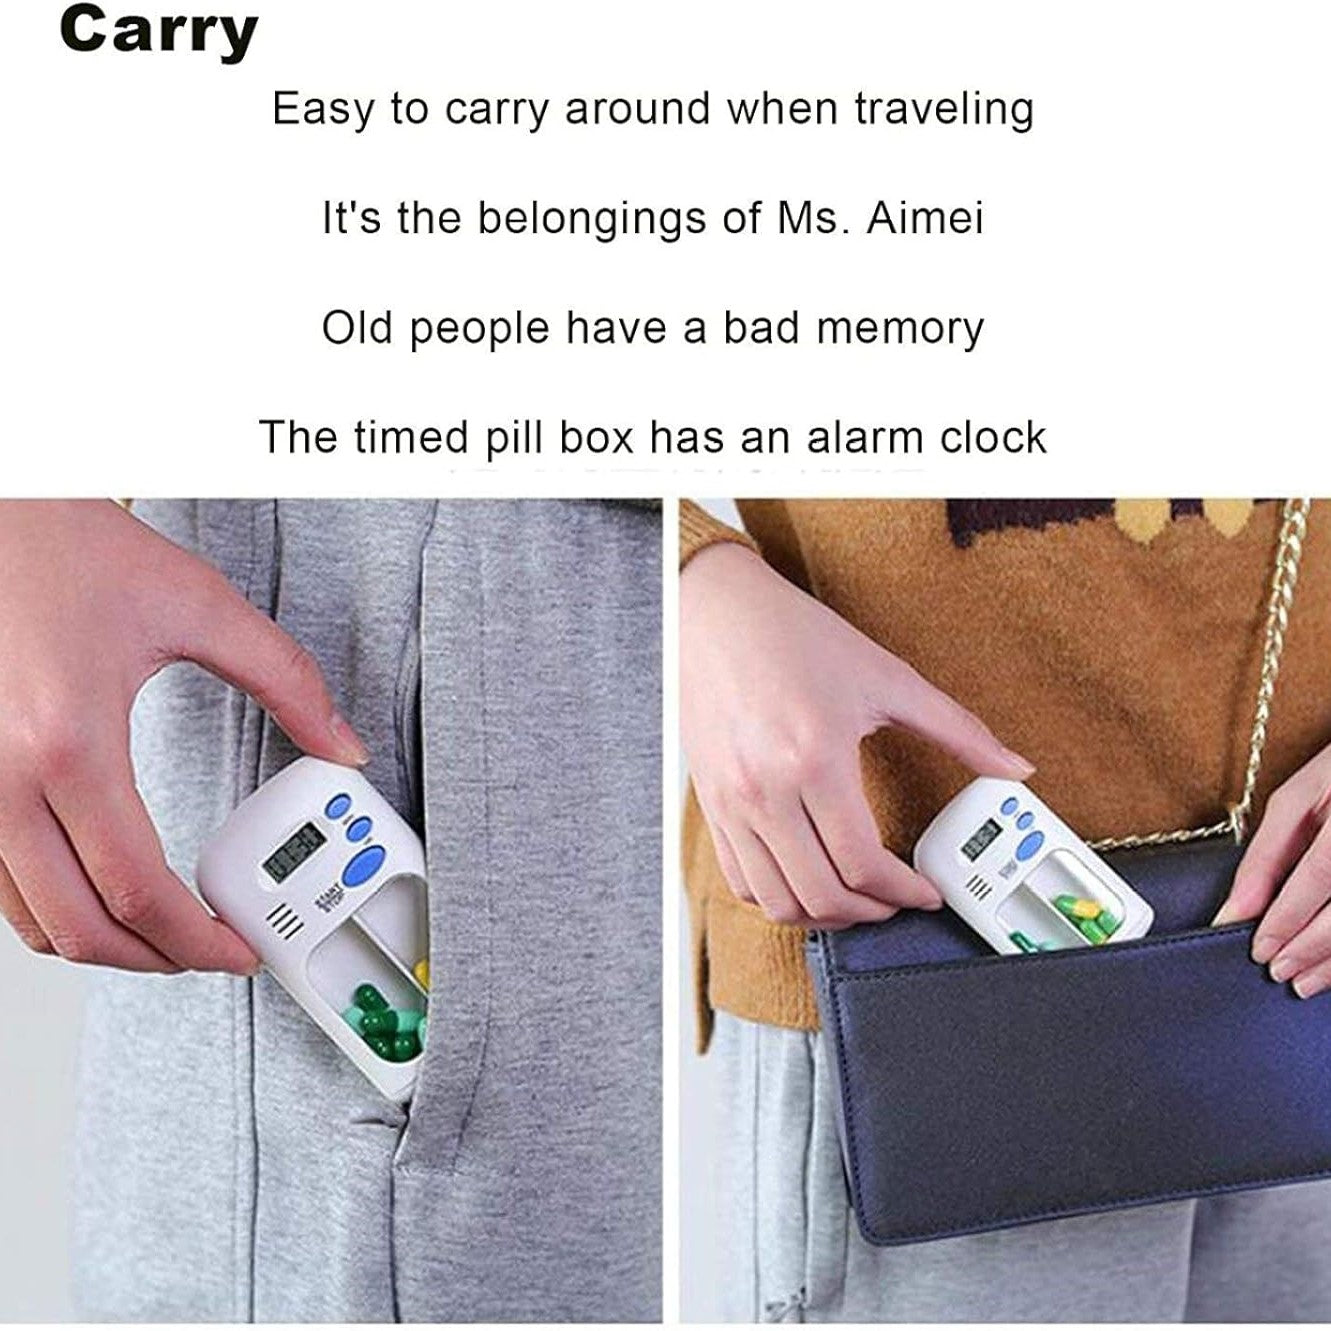 Someone is taking the Portable Mini Travel Carry Pill Box from a bag